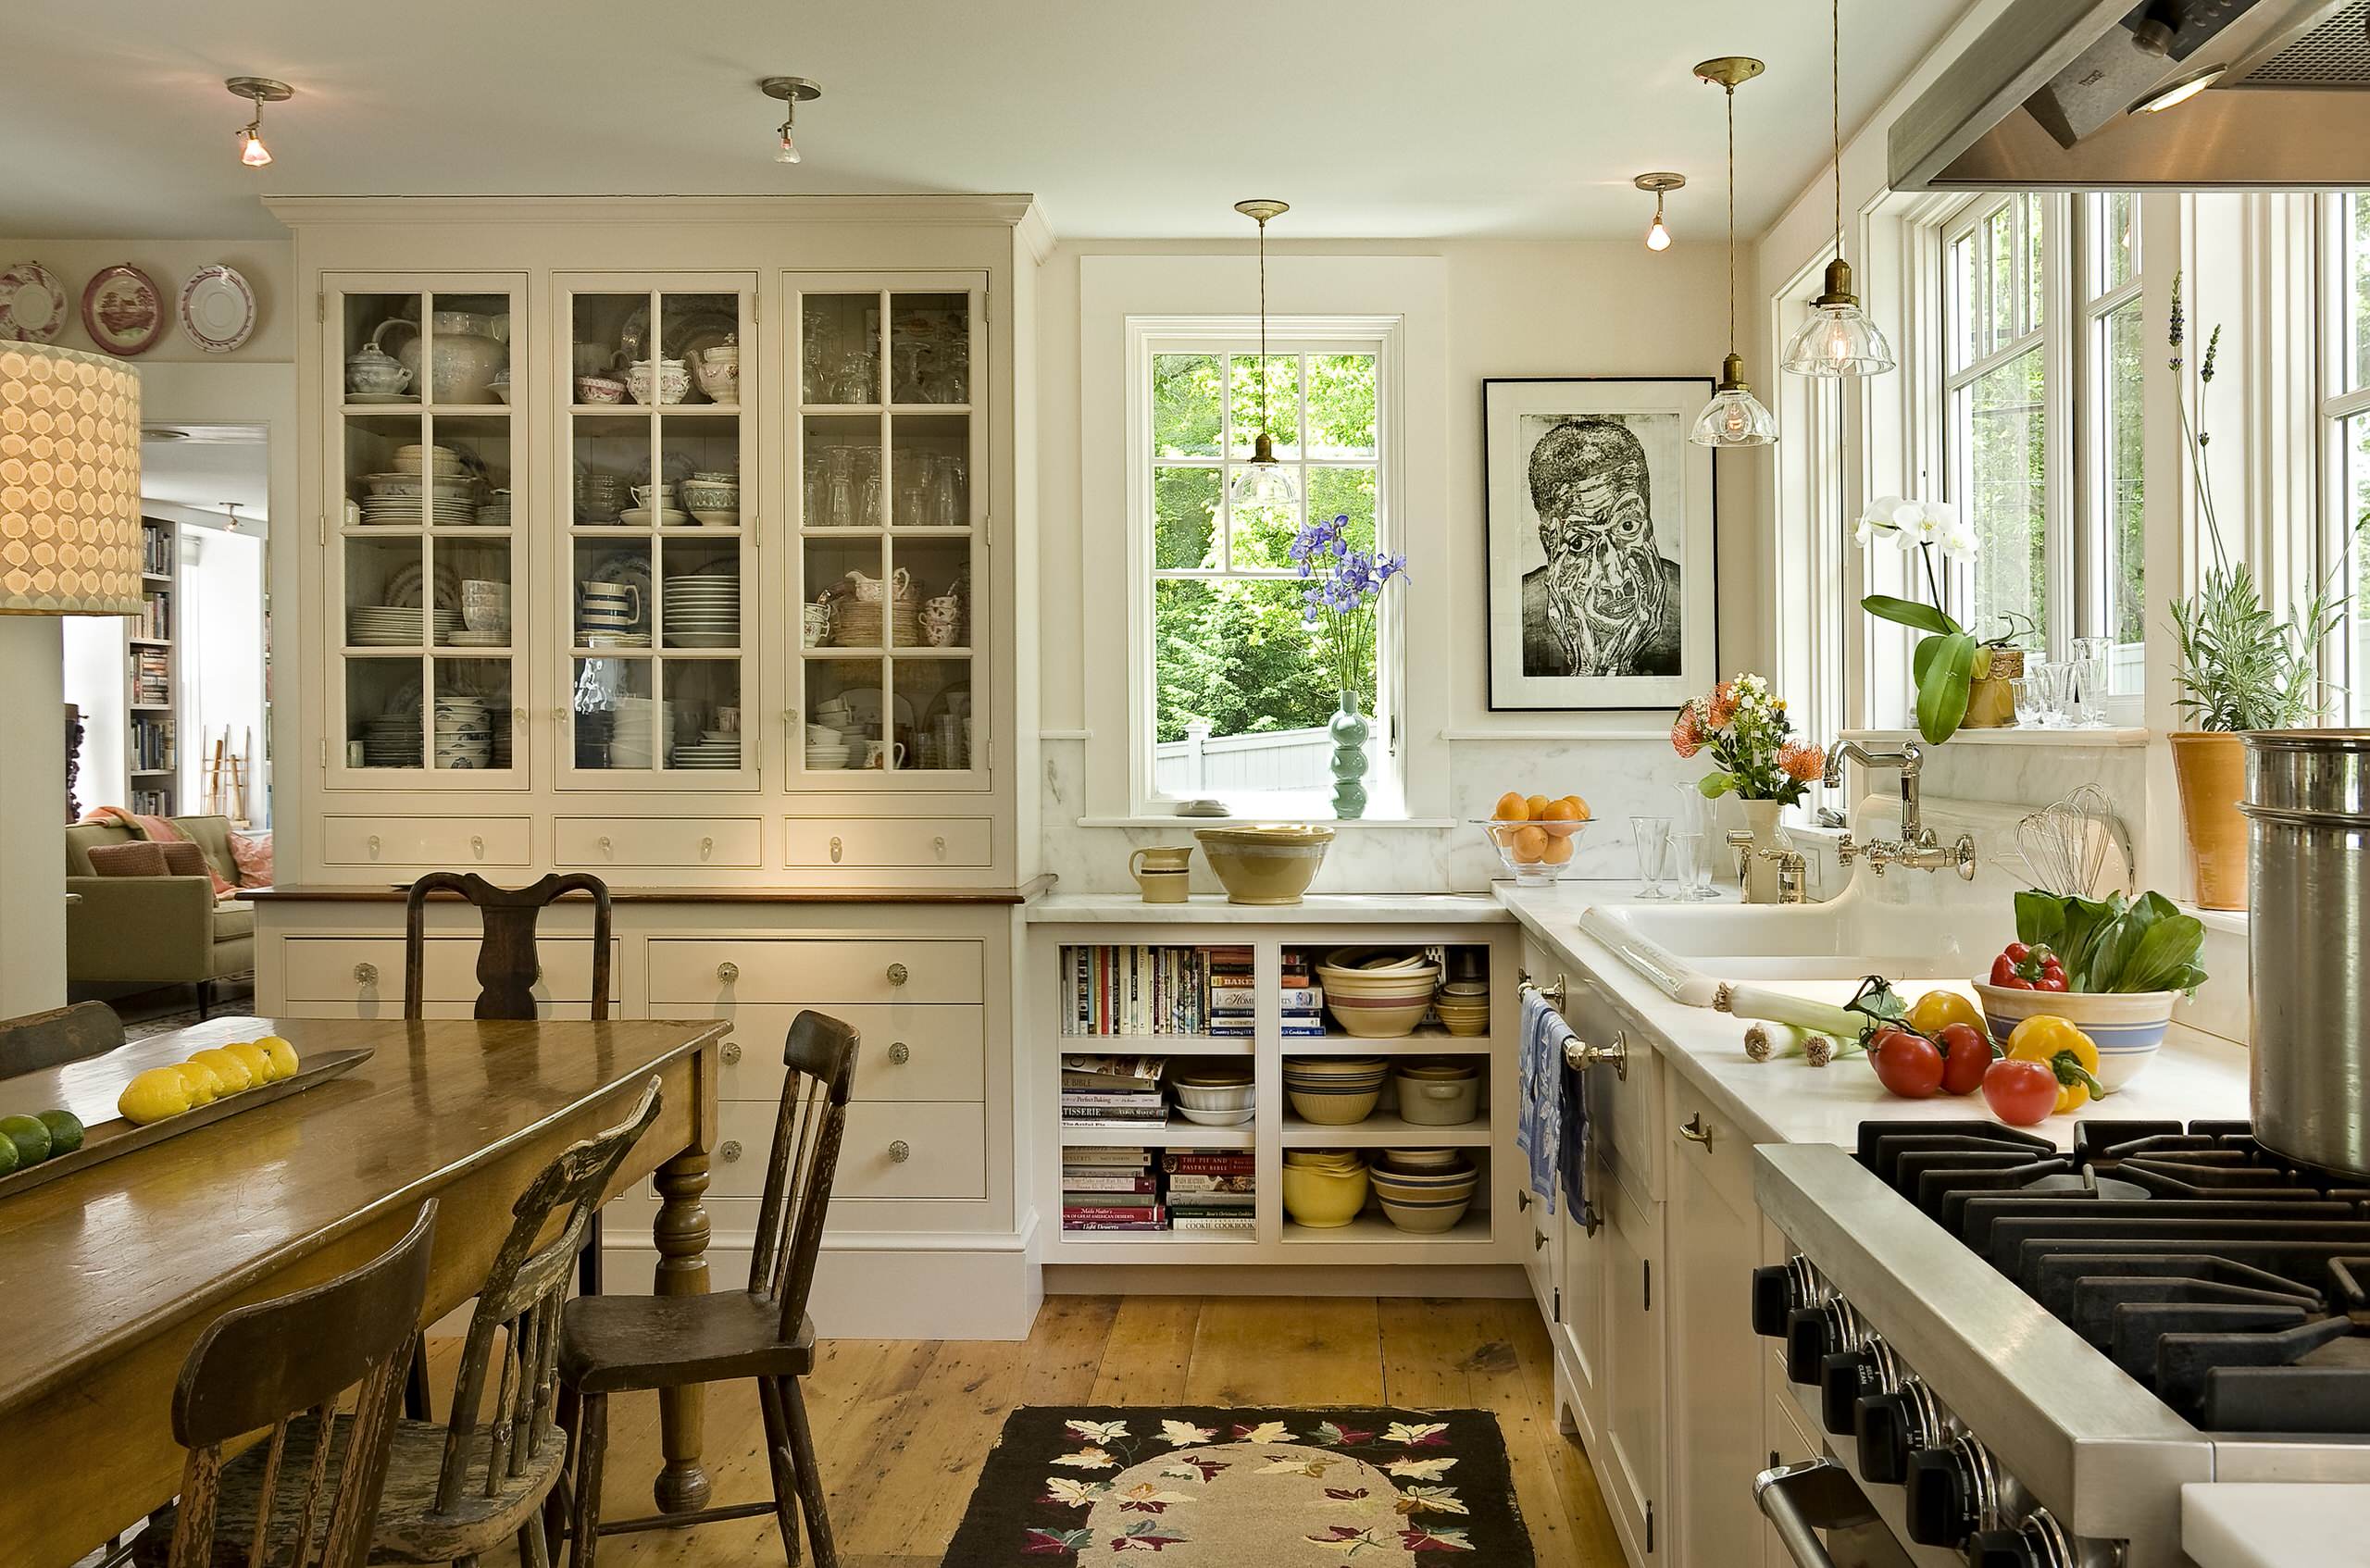 Table In Middle Of The Kitchen Ideas - Photos & Ideas | Houzz